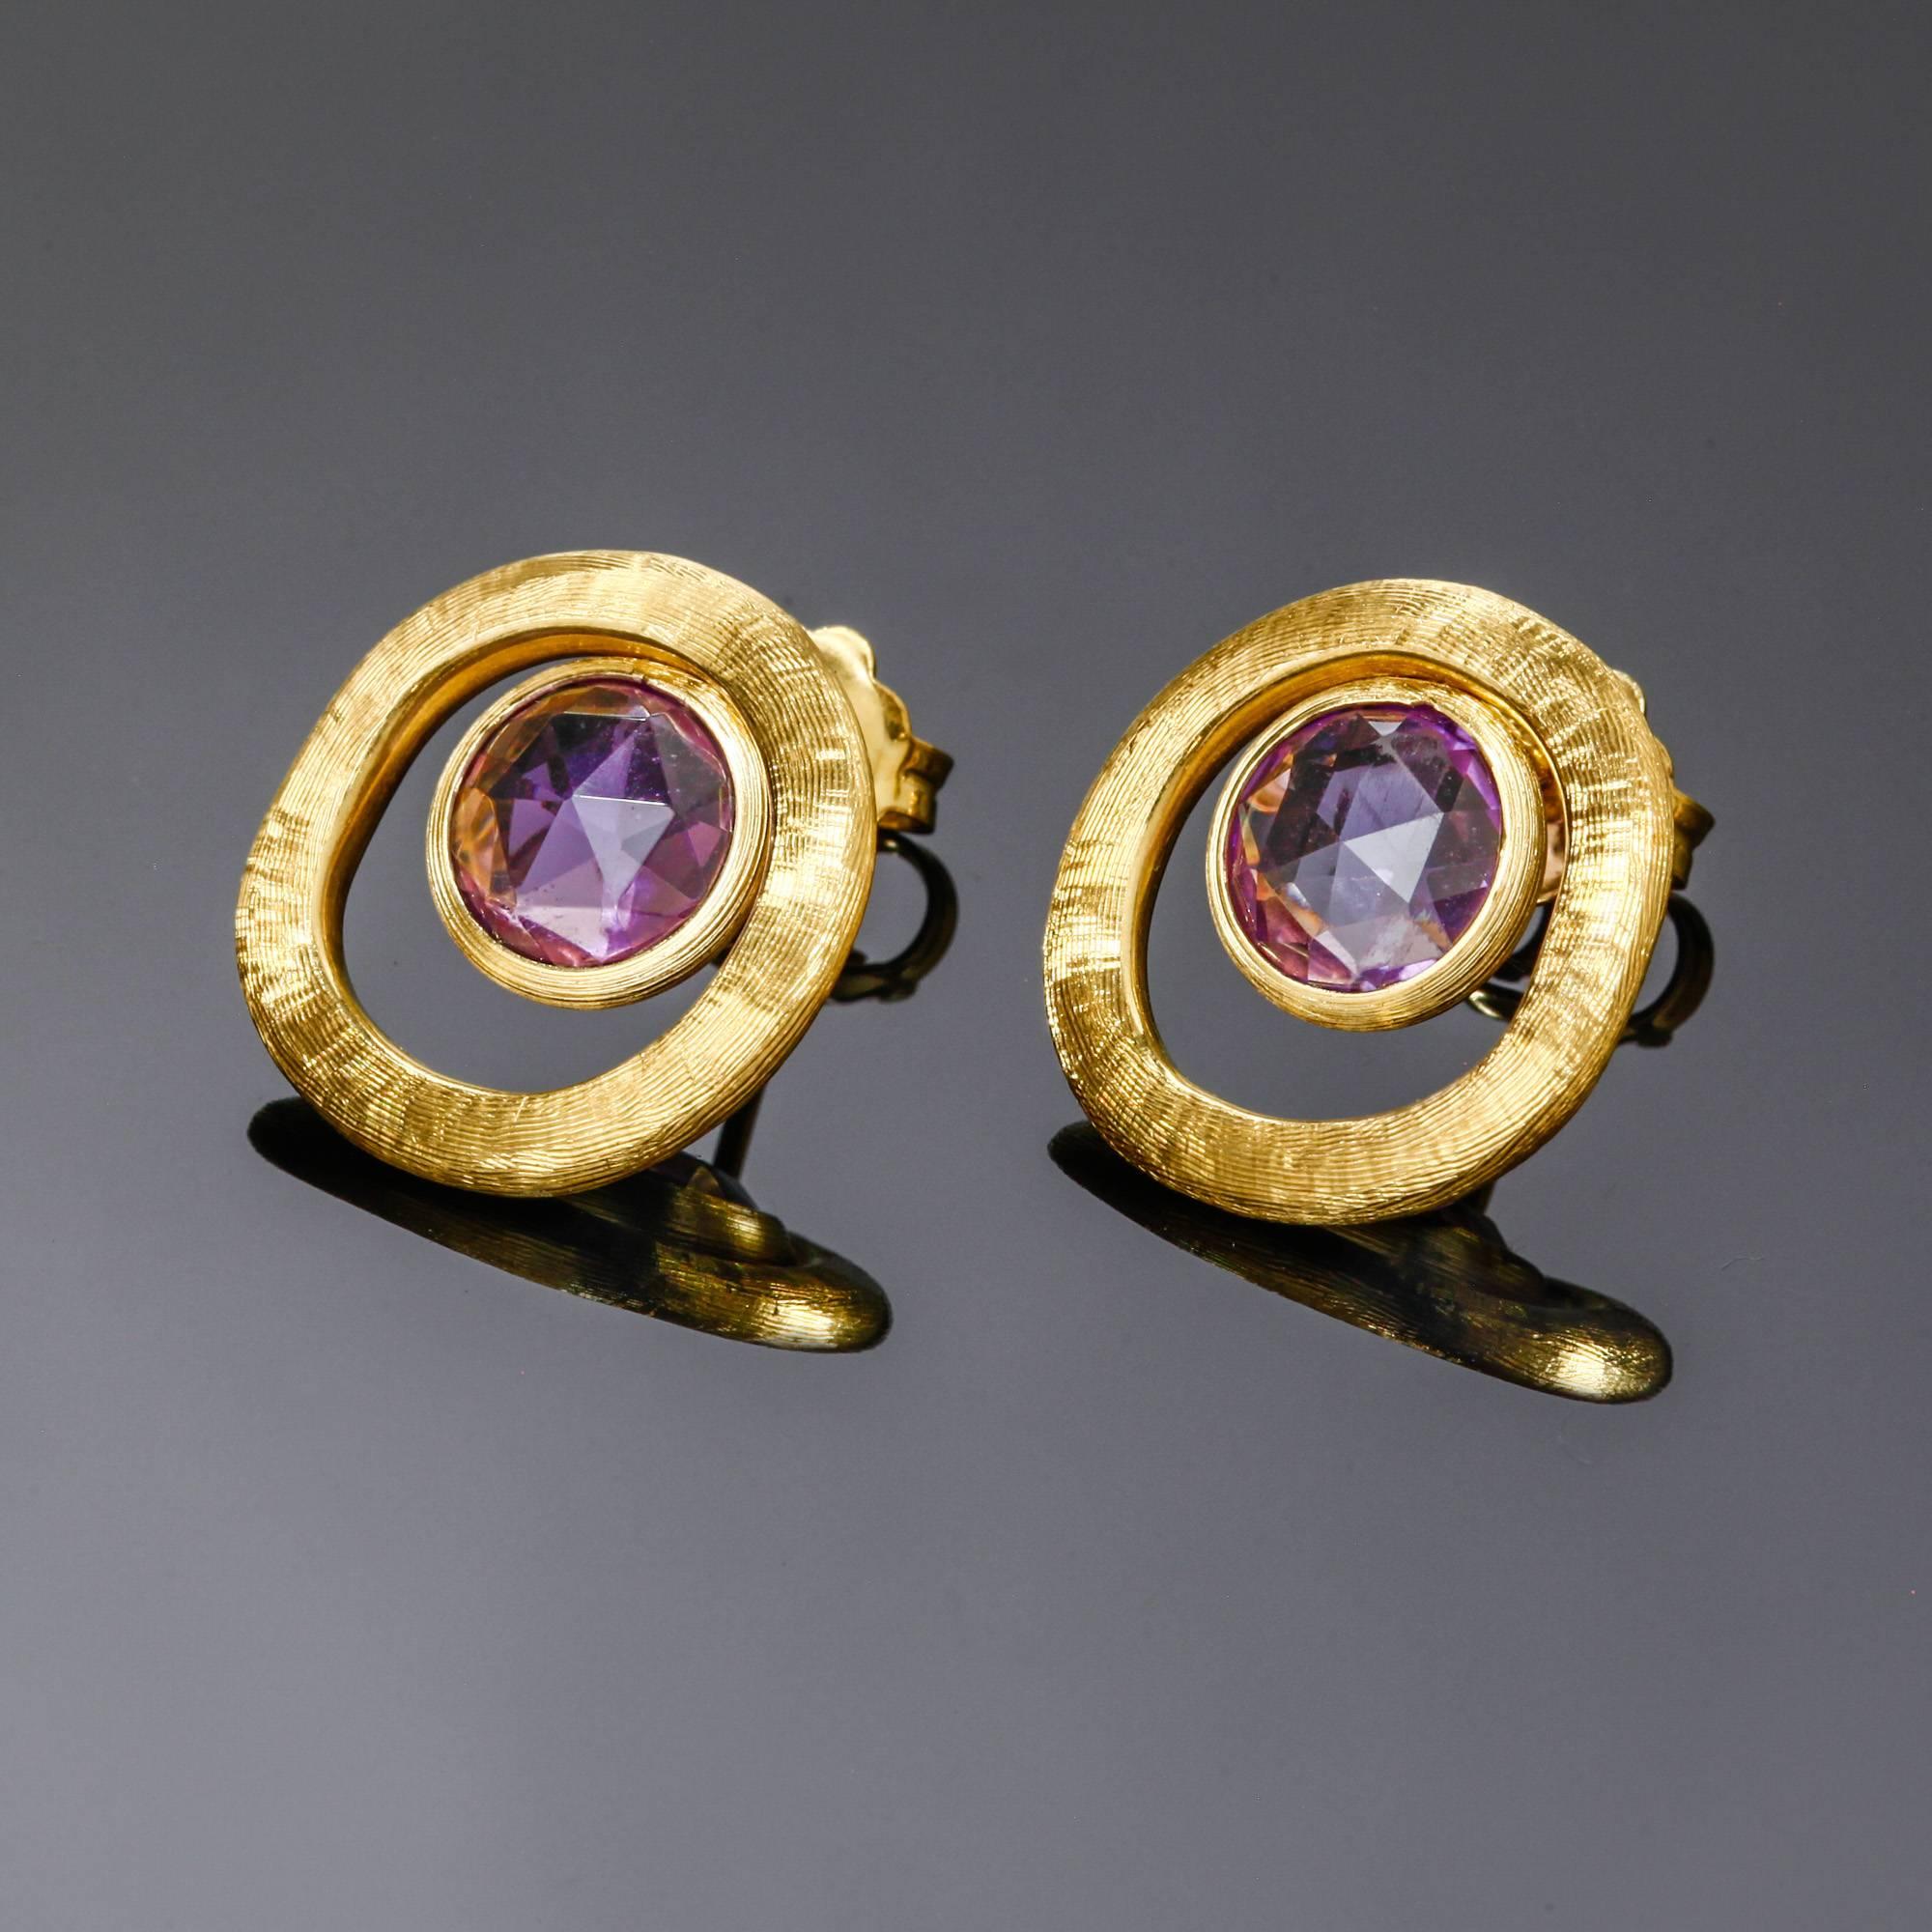 This pair of Marco Bicego amethyst earrings from the Jaipur Color collection is set in 18k yellow gold that was hand engraved by Italian artisans. These earrings have never been worn. Each earring measures approximately 12mm wide. 